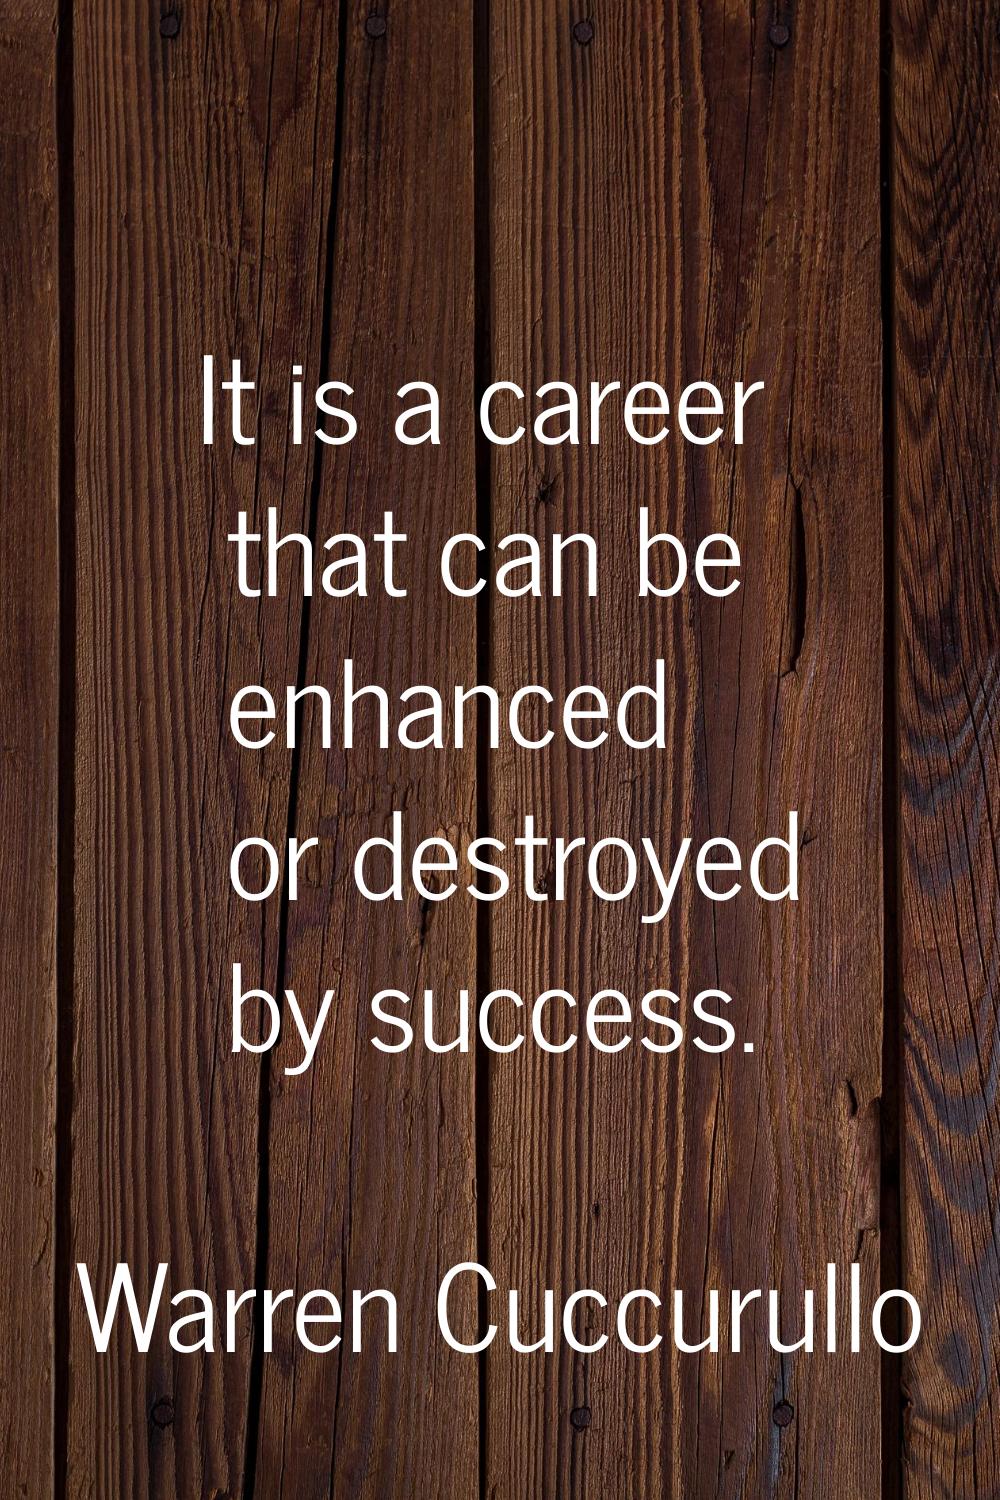 It is a career that can be enhanced or destroyed by success.